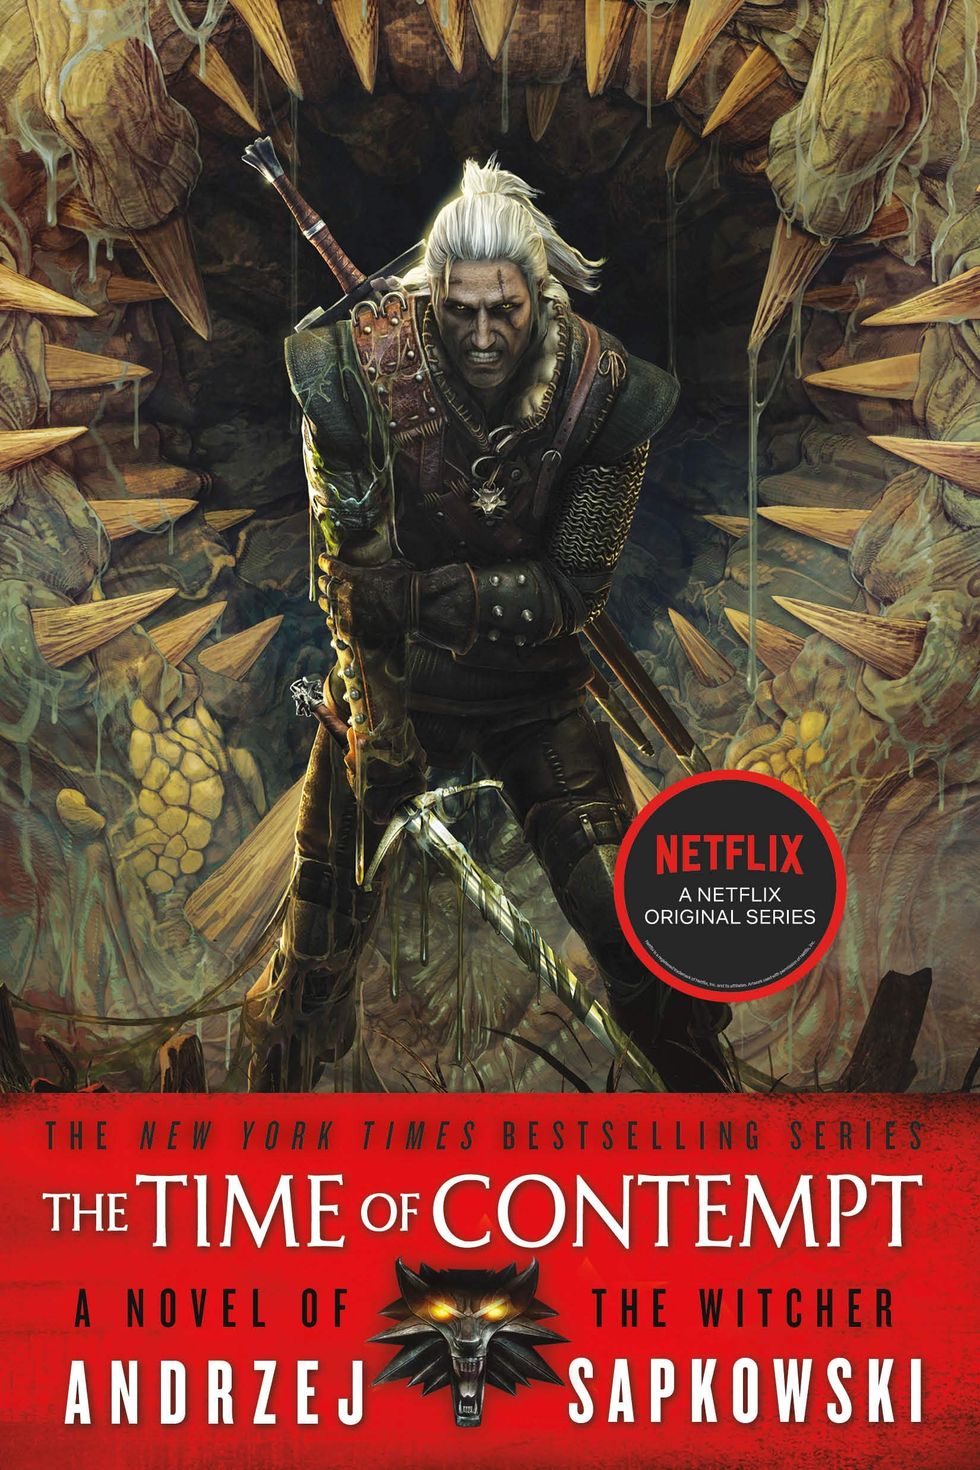 The Time of Contempt (The Witcher, Book 4)